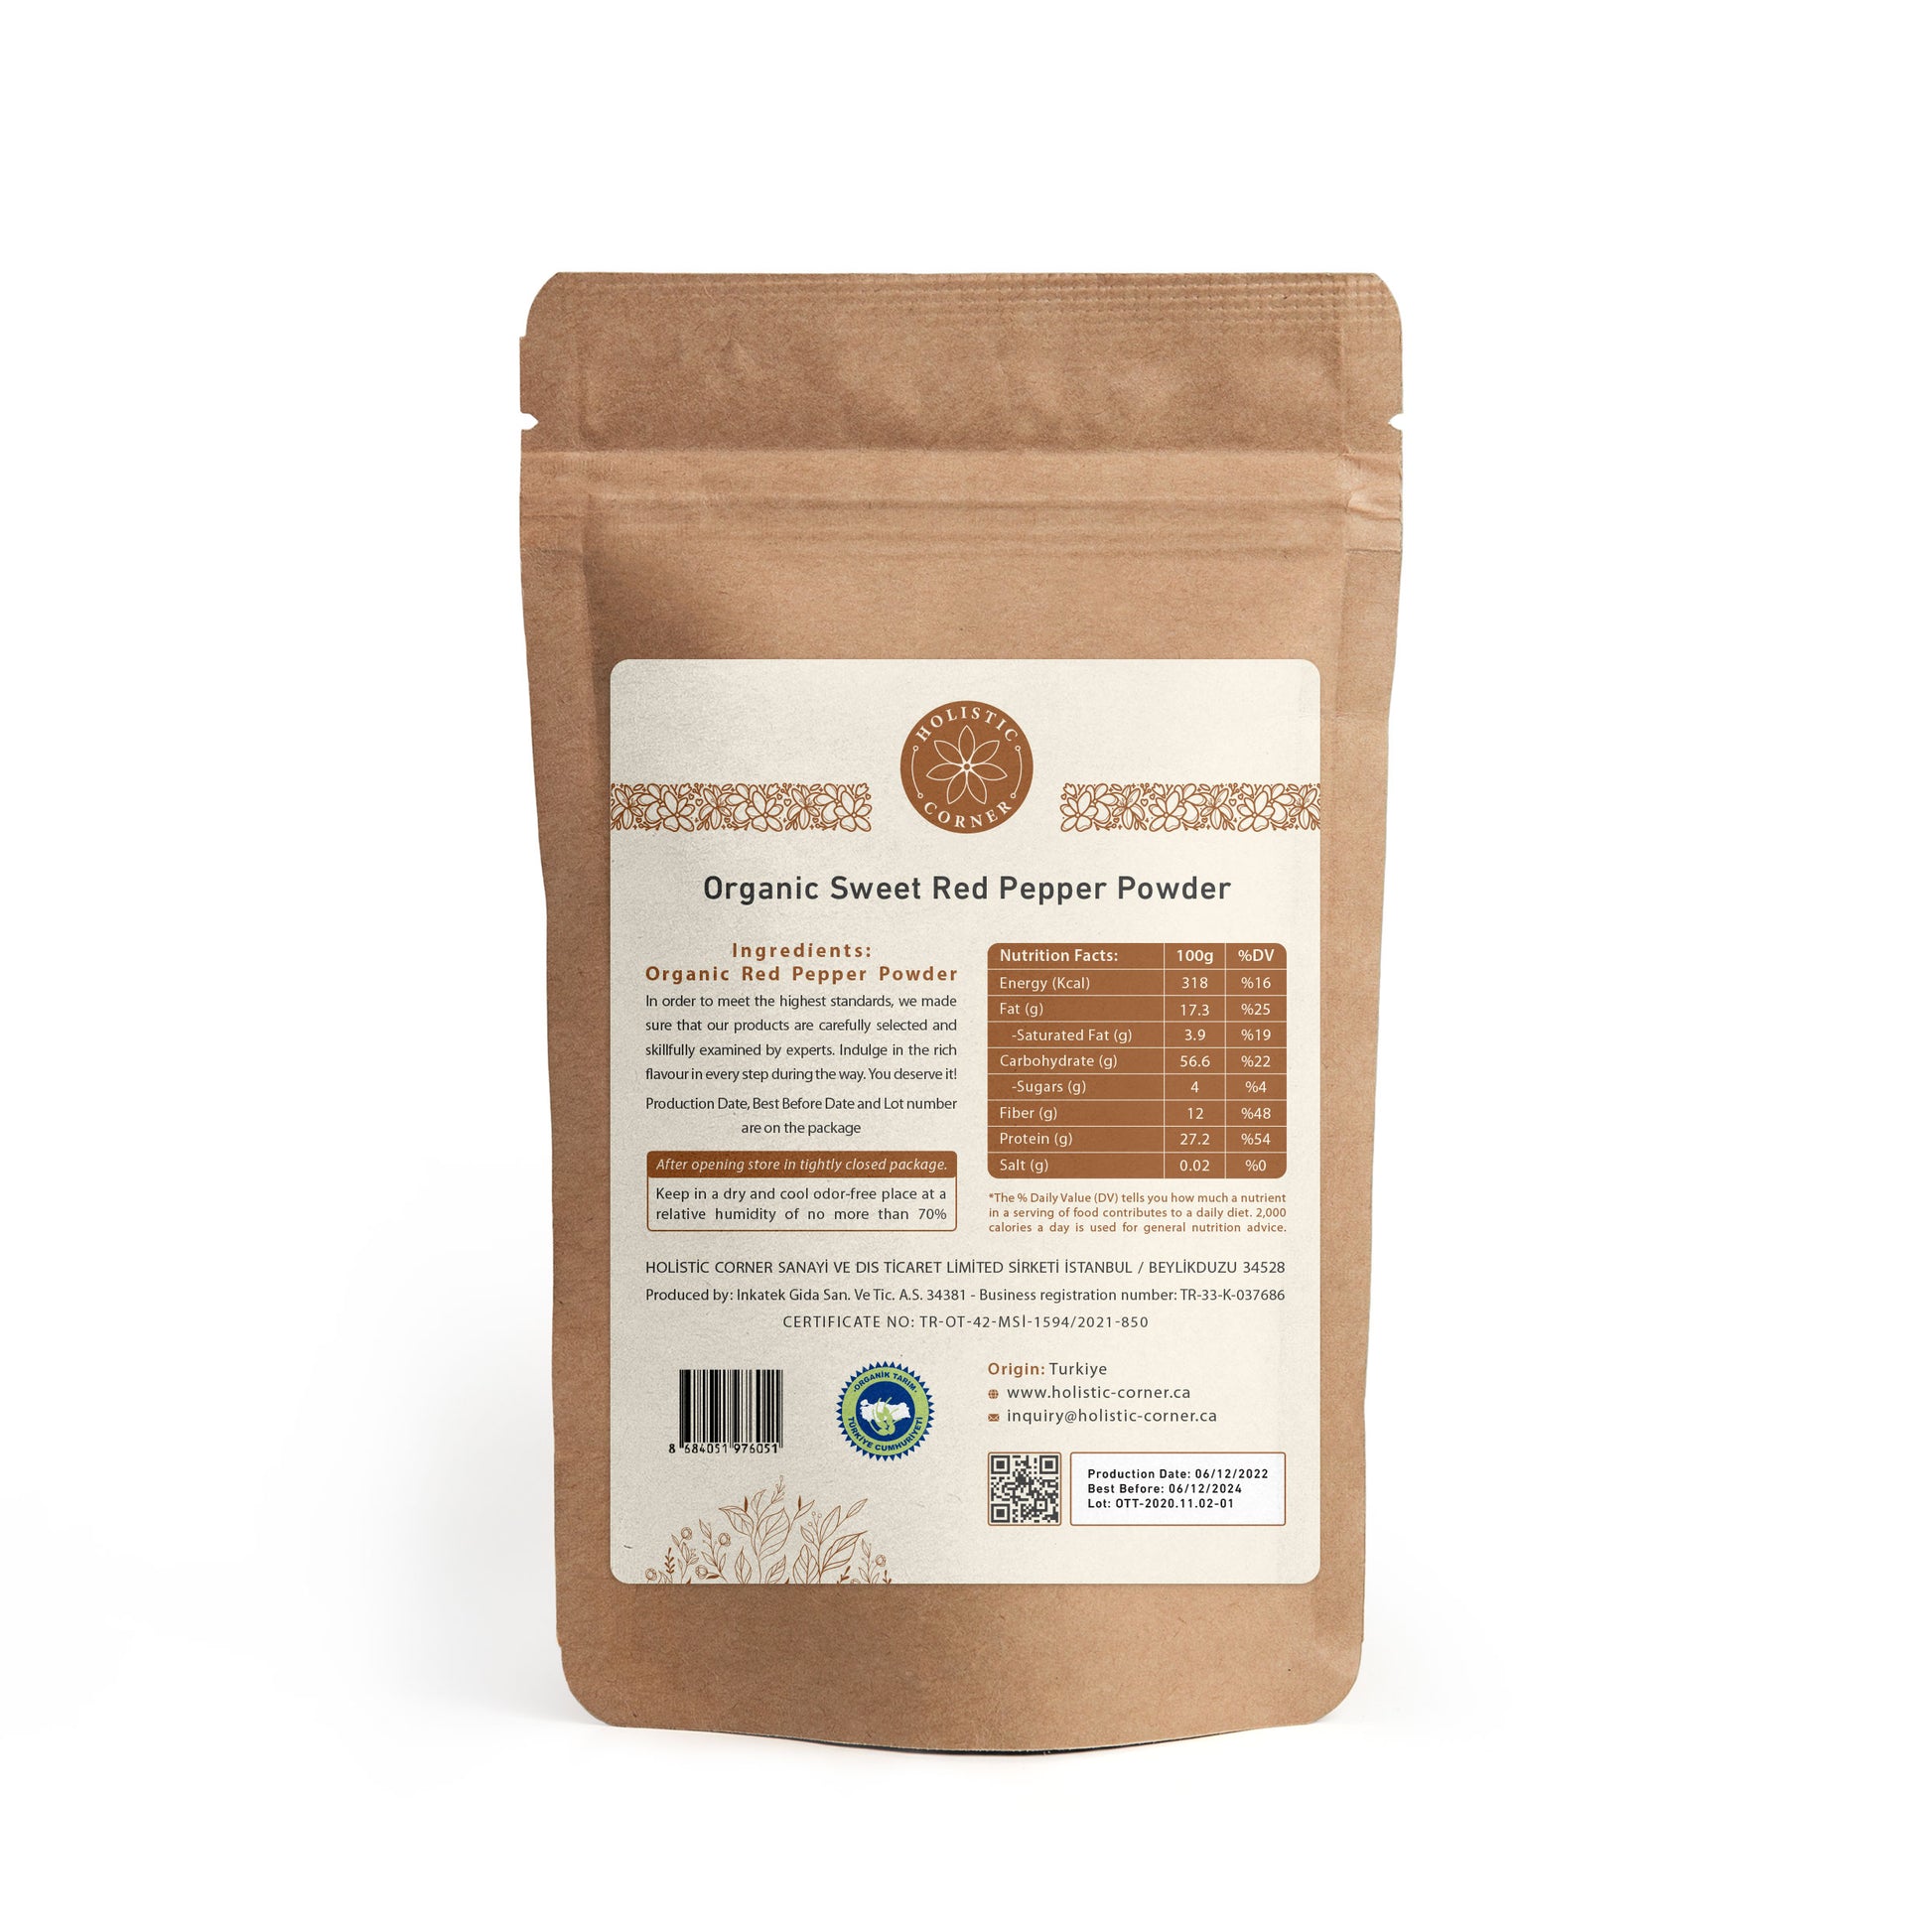 A vibrant and flavorful addition to your kitchen. Enhance your dishes with this organic spice. 0.19 lb.